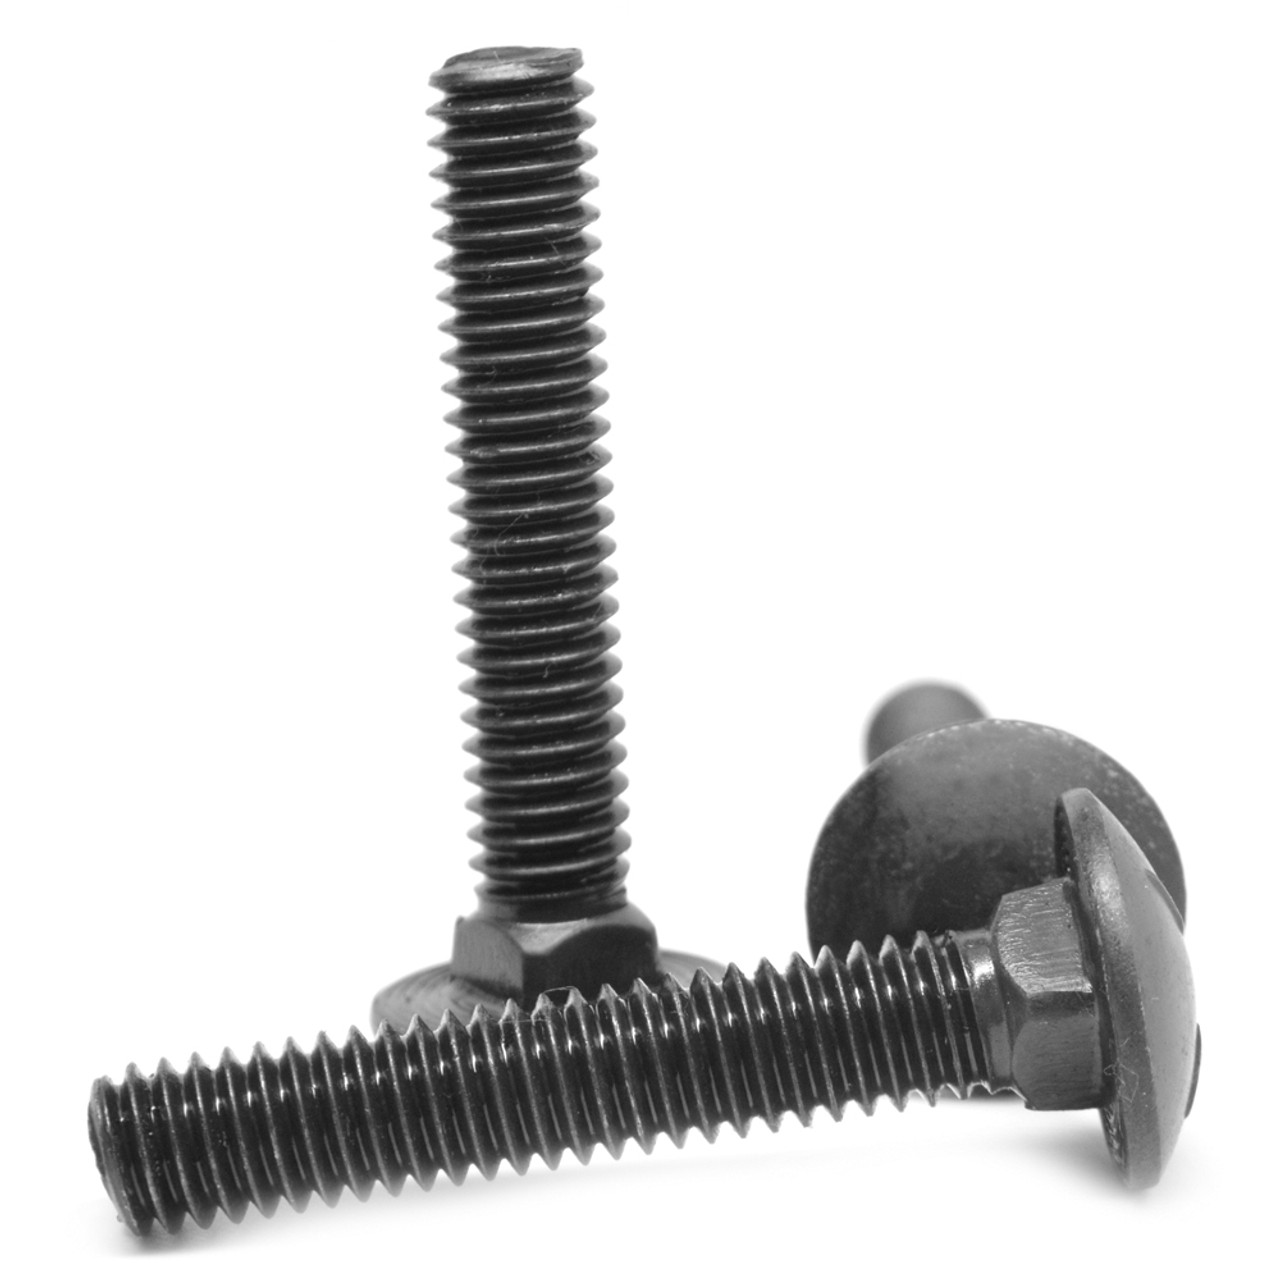 5/16-18 x 1 1/4 Coarse Thread Carriage Bolt Low Carbon Steel Black Oxide